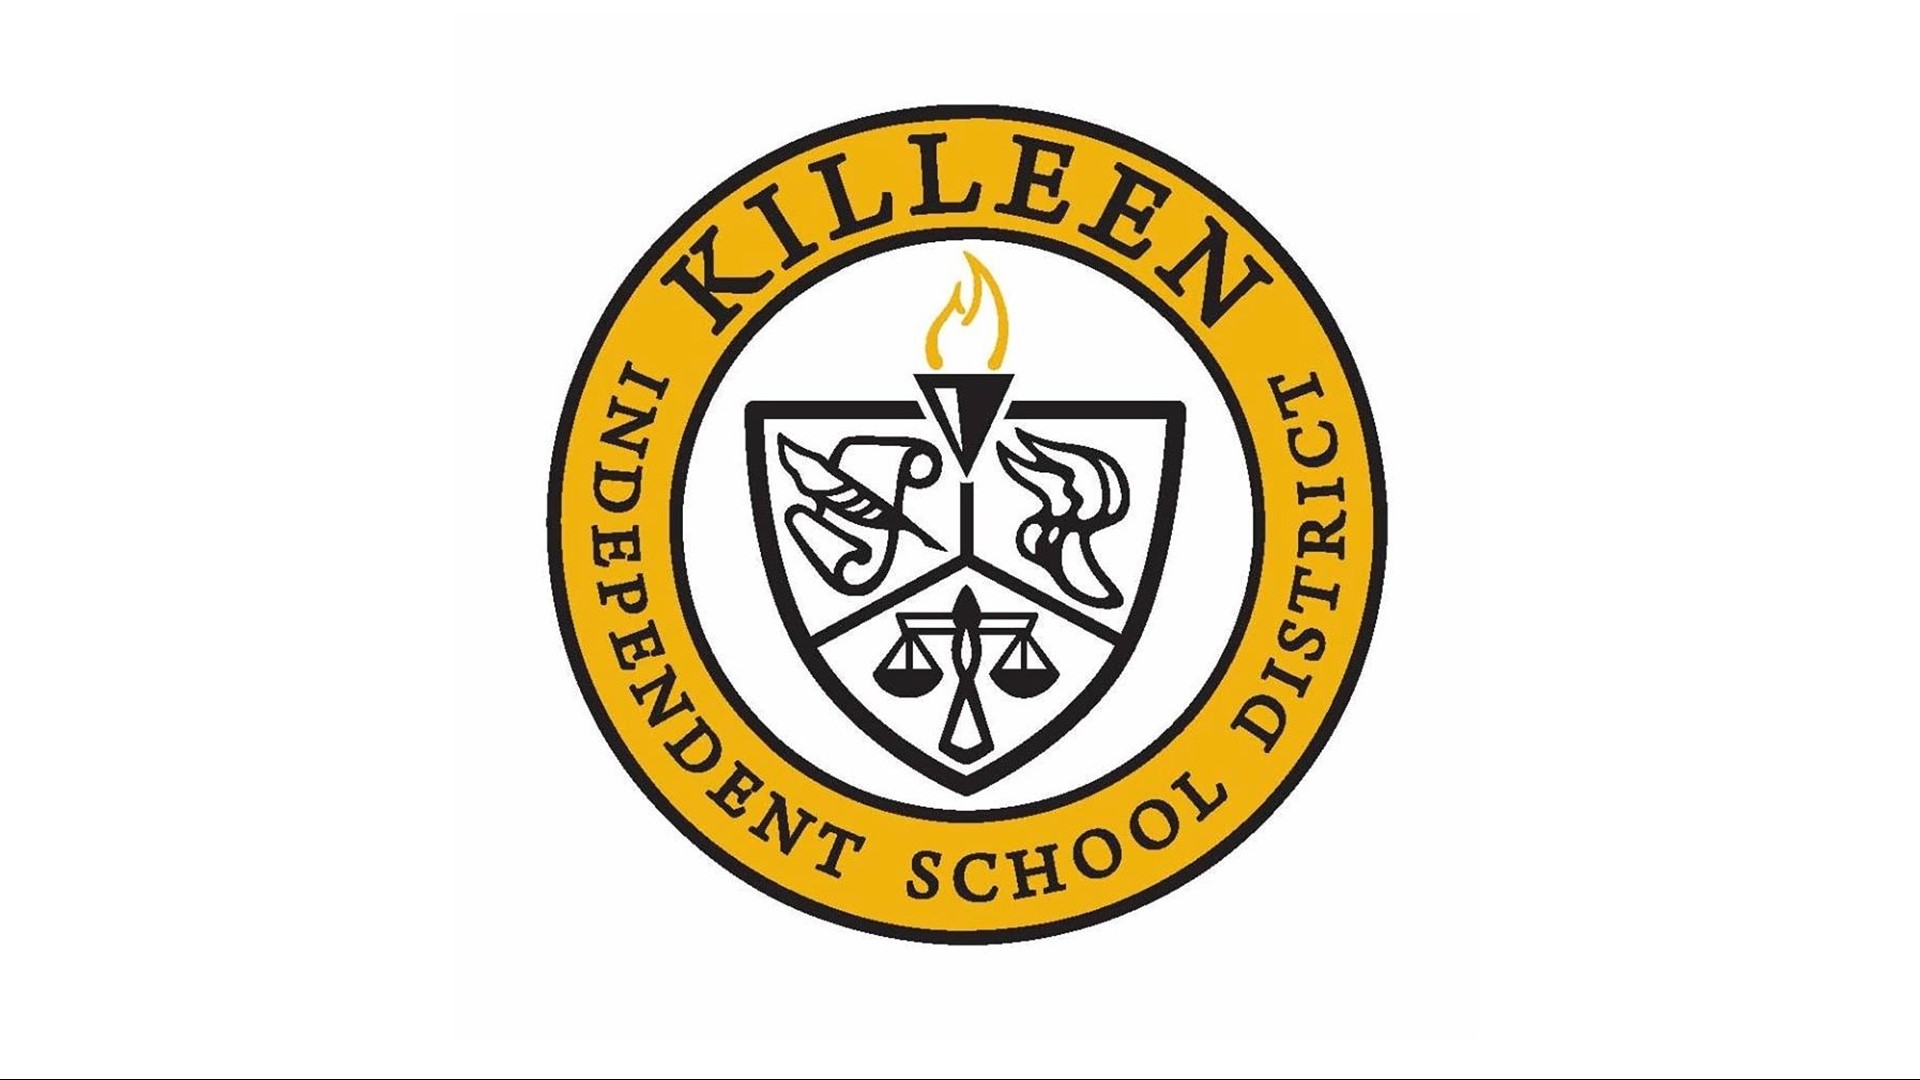 In a unanimous decision, the Killeen ISD board decided to rezone the district to accommodate for Maude Moore Wood Elementary School for the 2019-2020 school year.